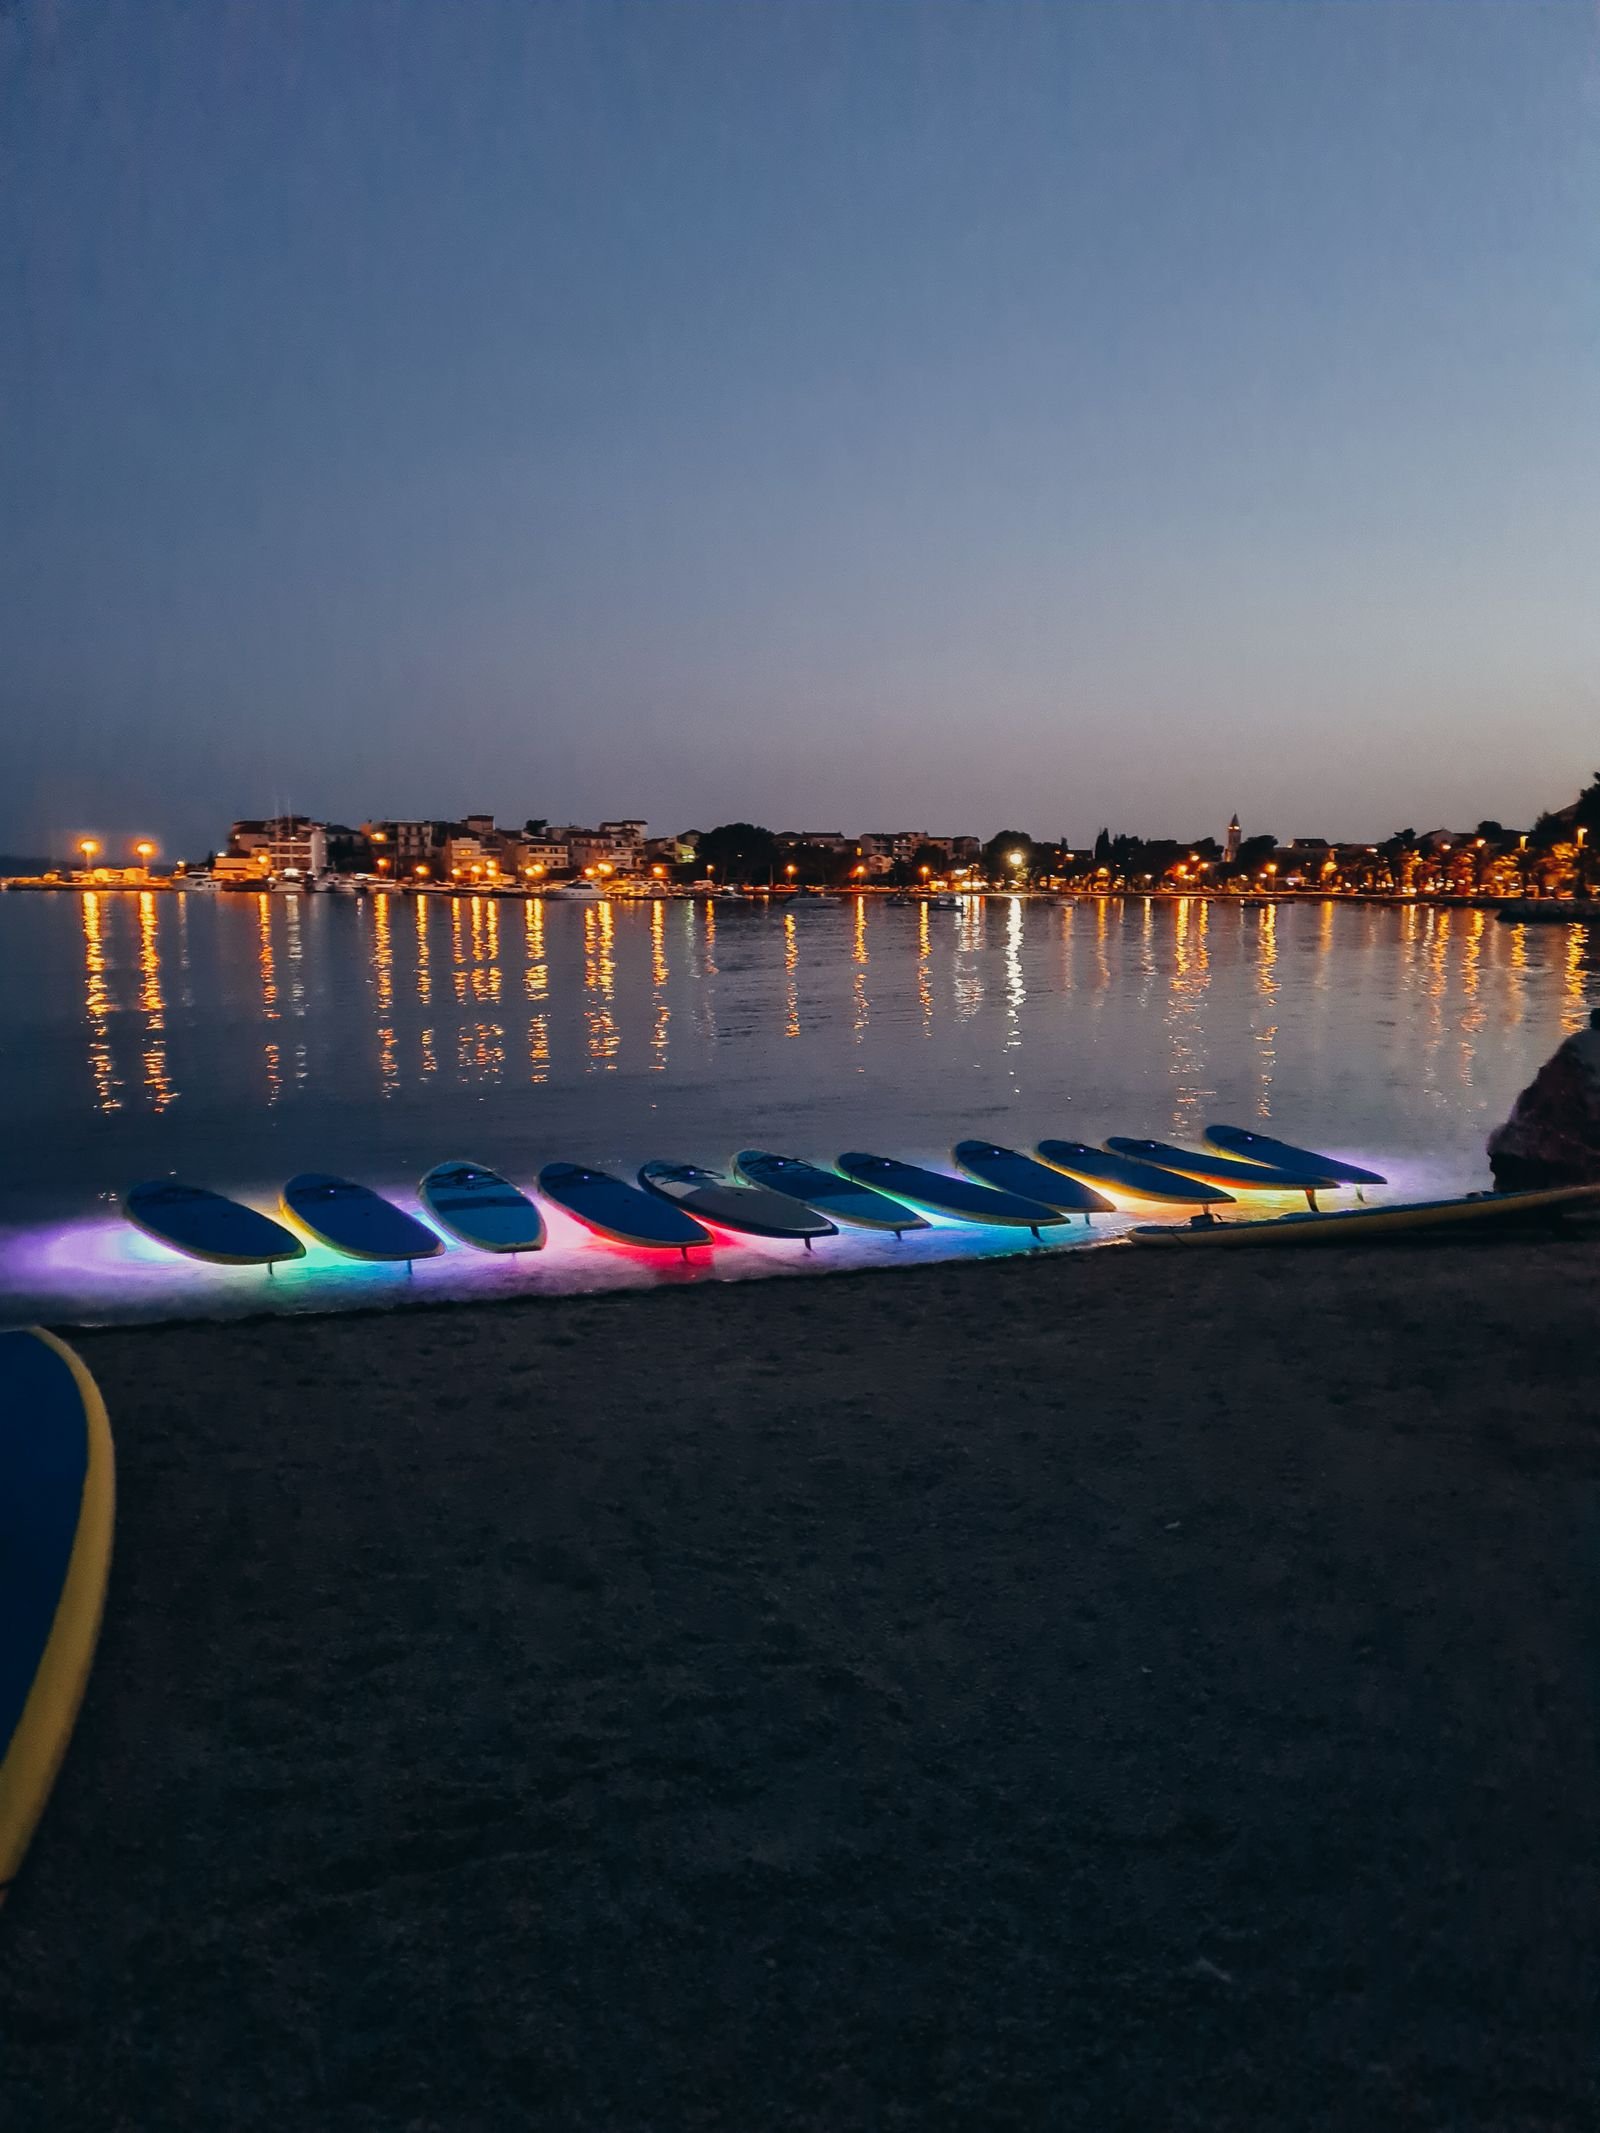 paddleboards lined up on the beach at dusk with neon lights underneath them